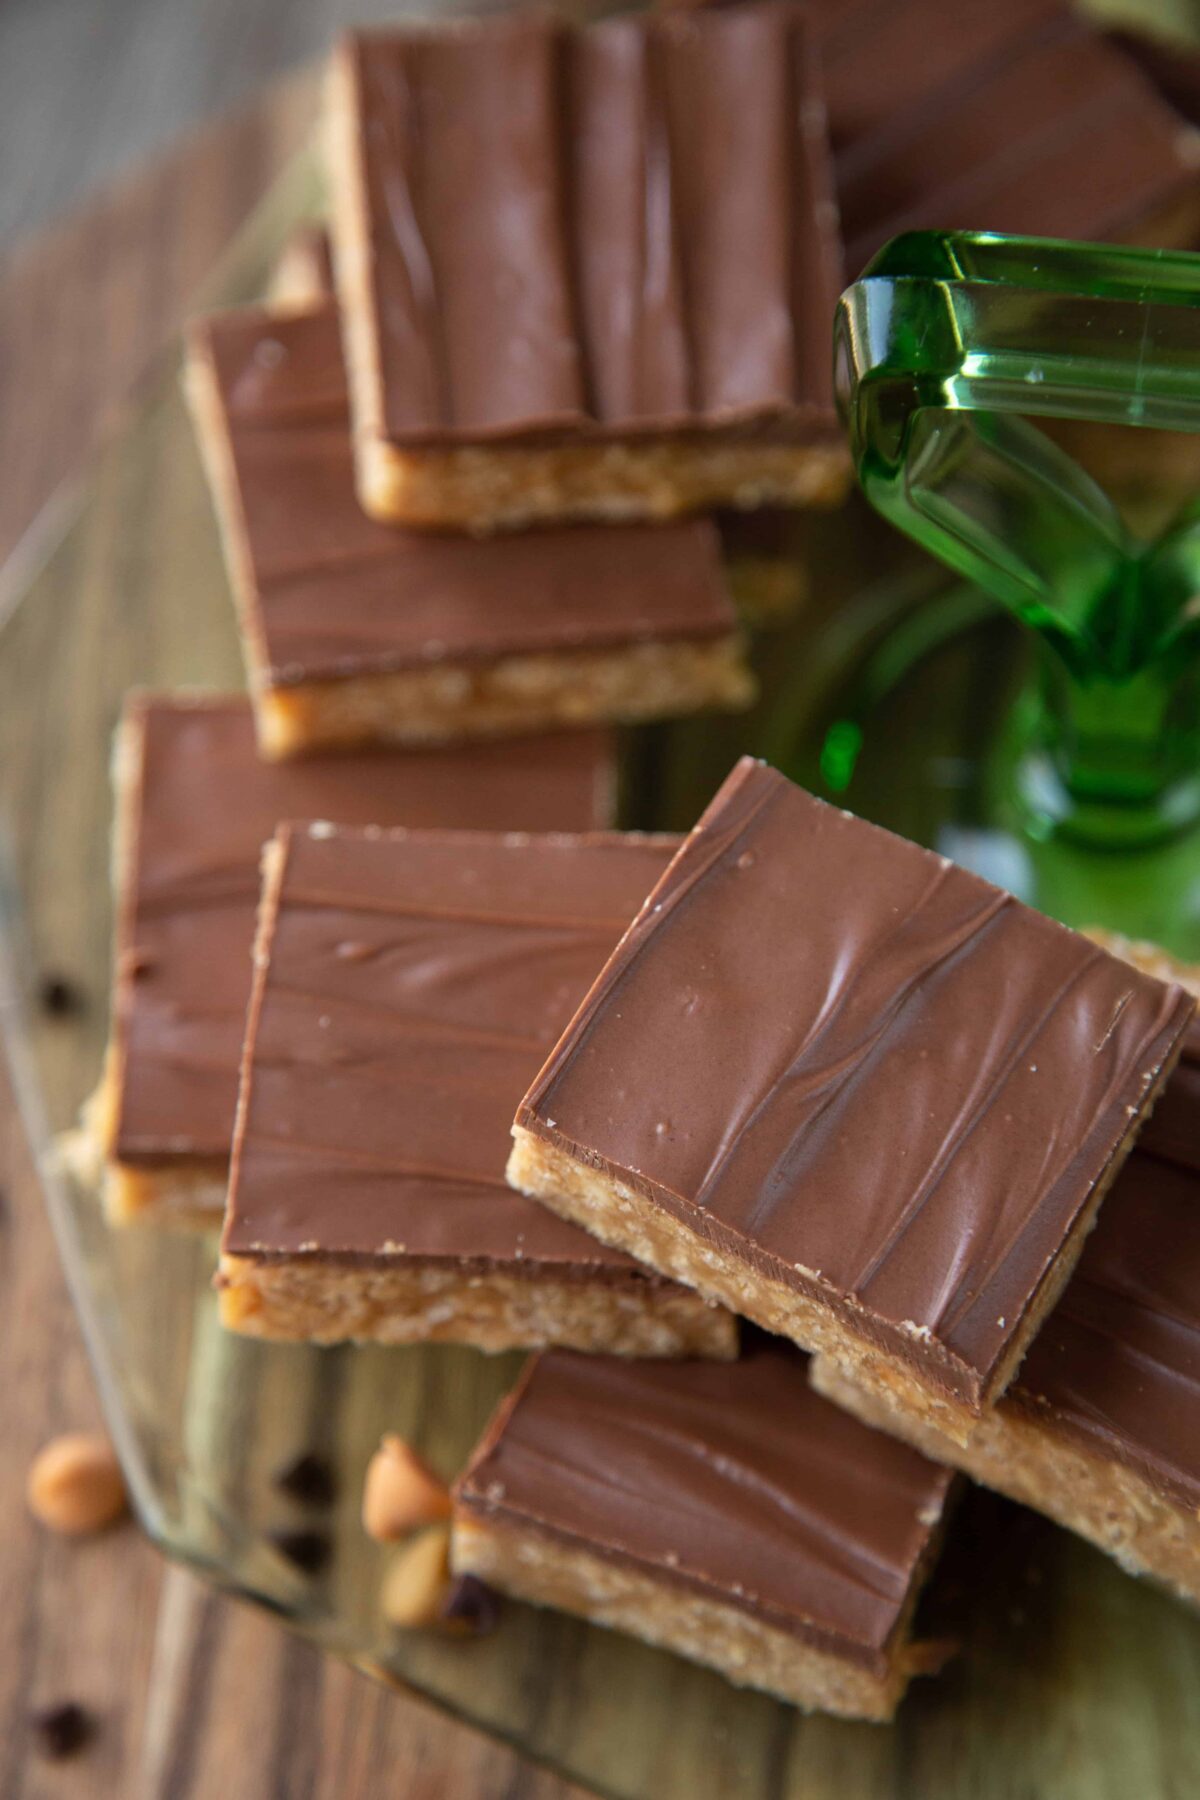 special k bars stacked on a green glass cookie platter.